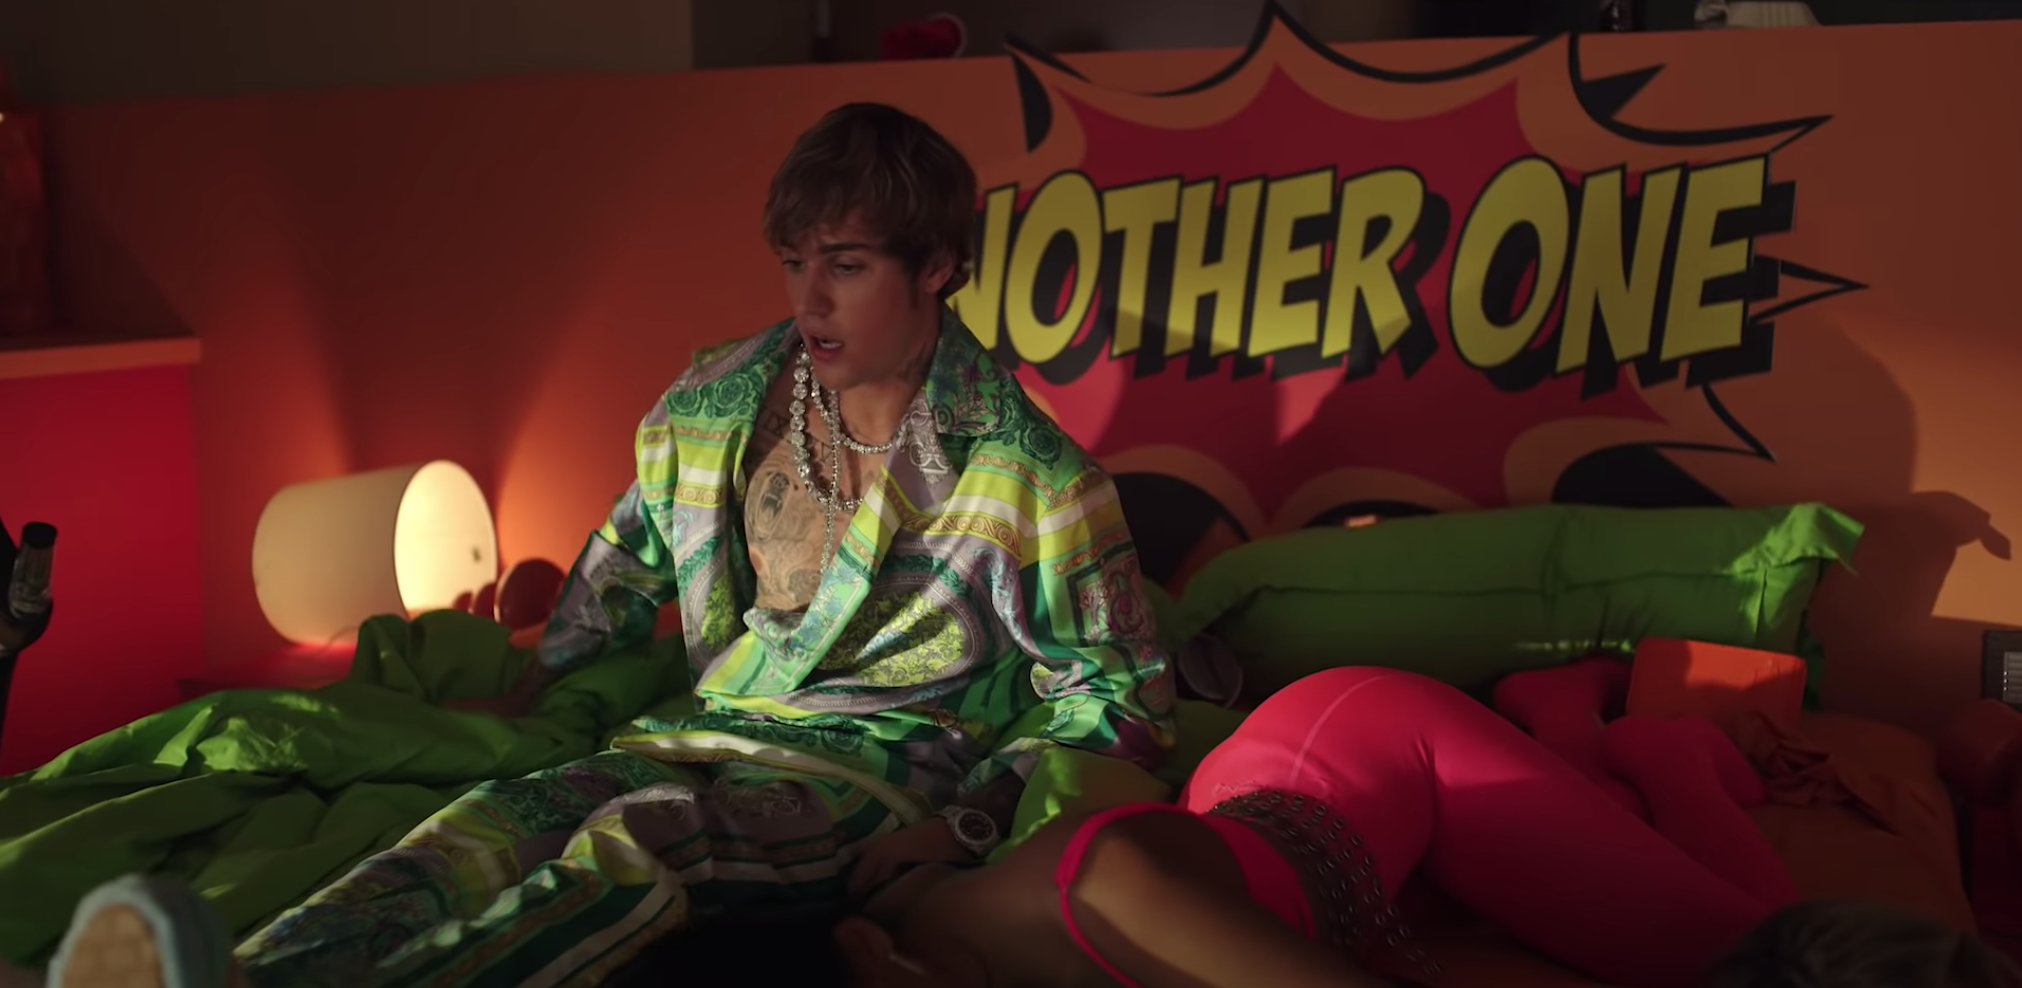 Justin wakes up in a bed with a room full of women after a wild night